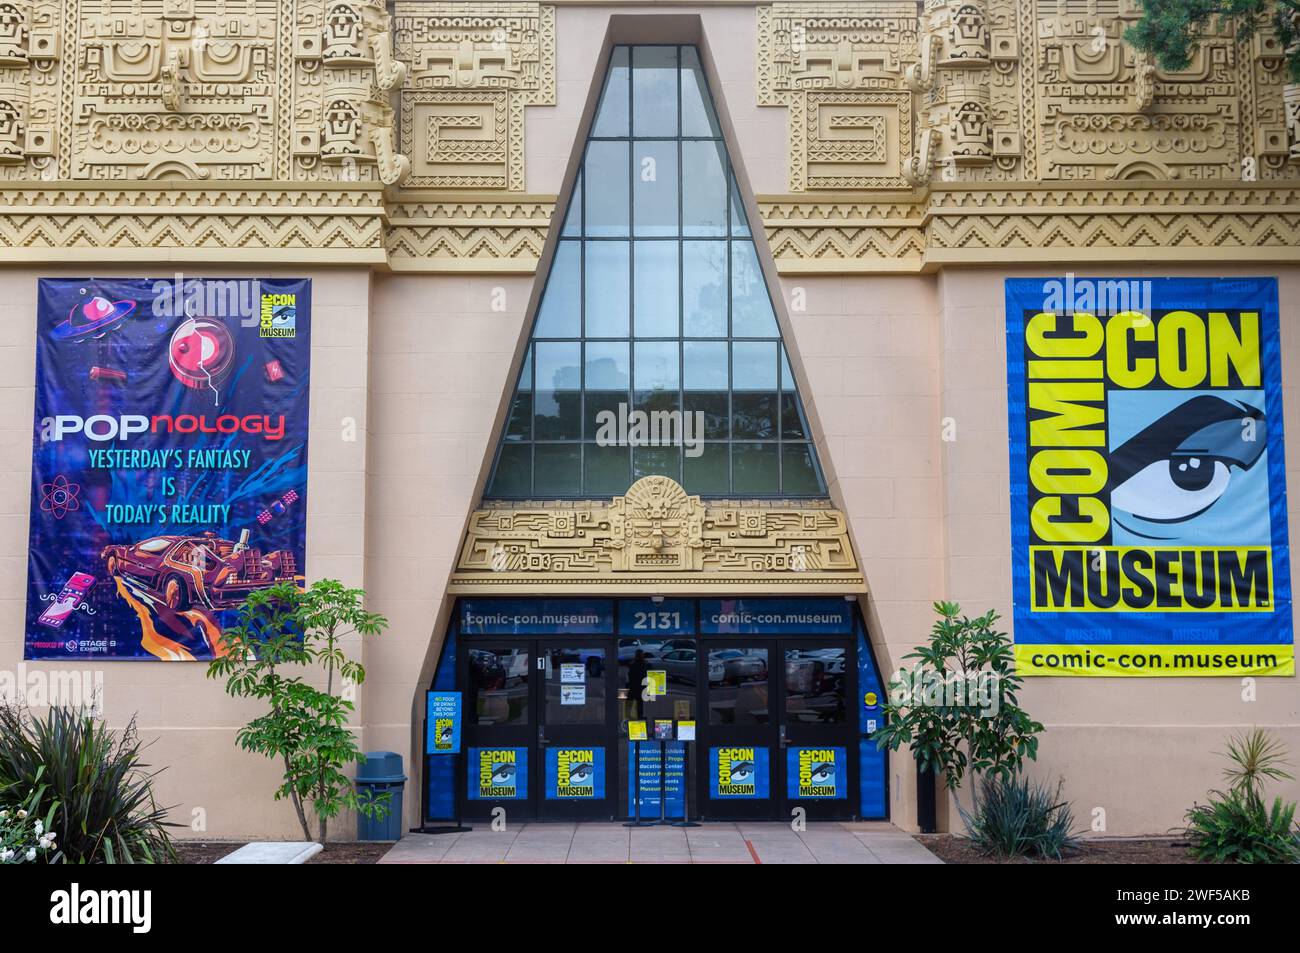 Comic Con Museum Building Facade Entrance with Pop Culture Information Wall Posters in San Diego, California World Famous Balboa Park Stock Photo